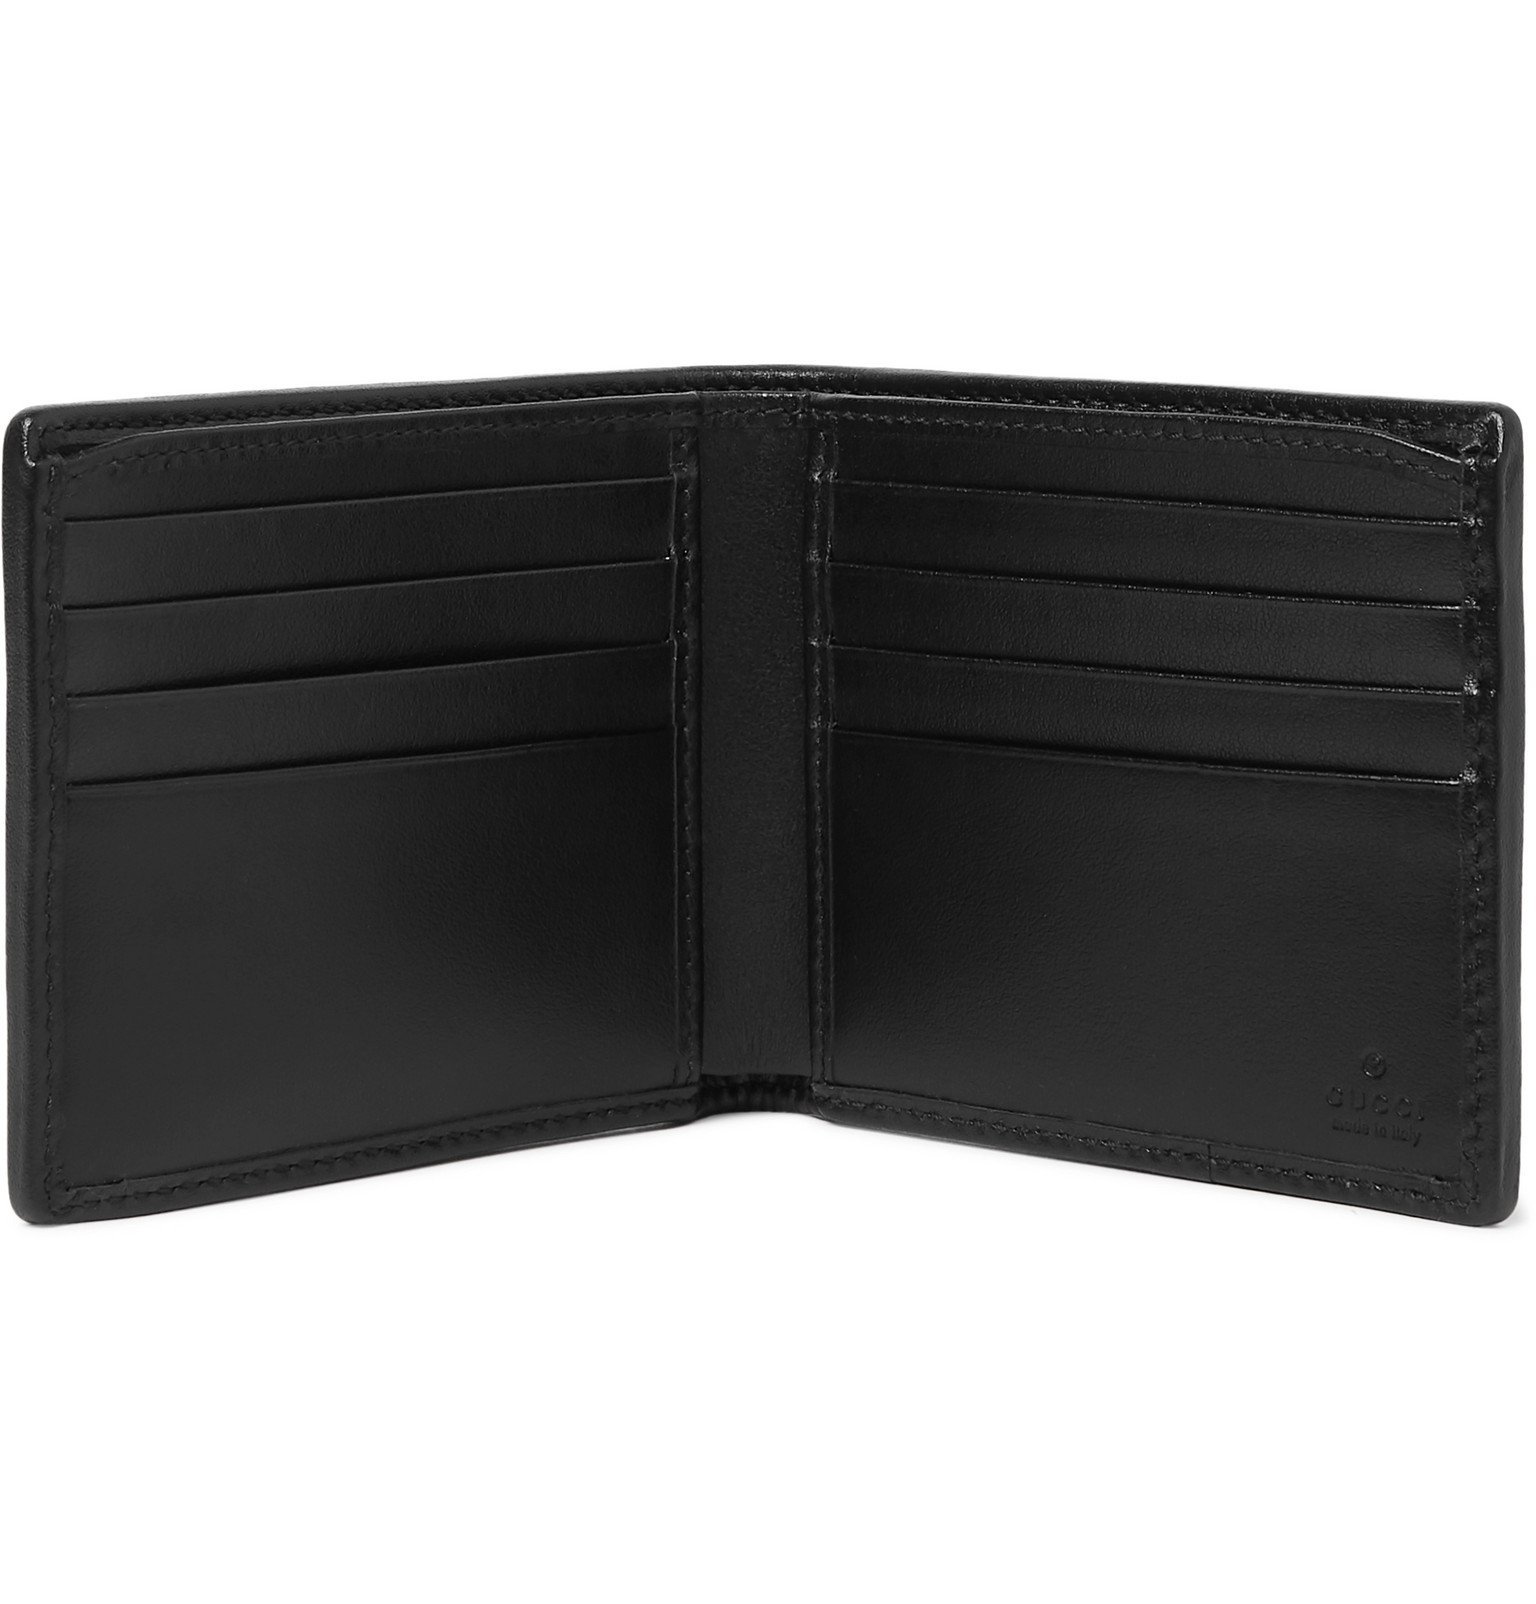 Gucci - Rhombus Quilted Leather Billfold Wallet - Black Gucci